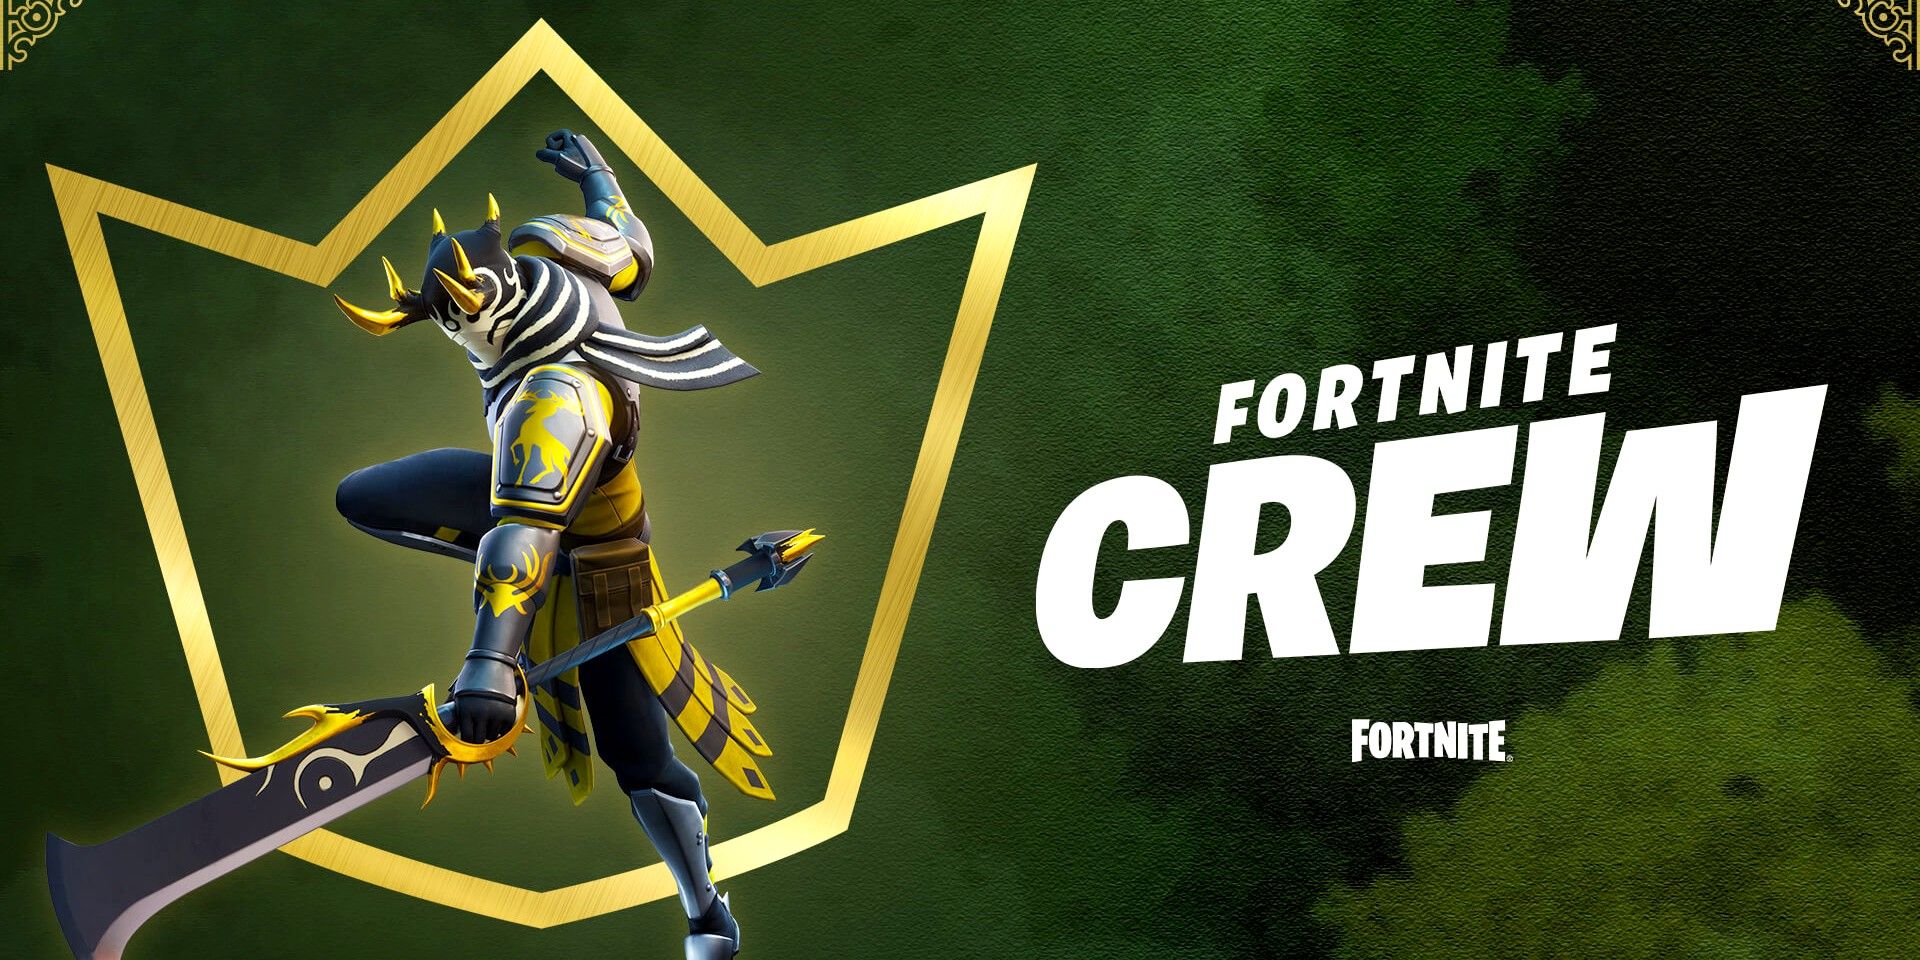 A Fortnite Crew poster featuring a character surrounded by the crown